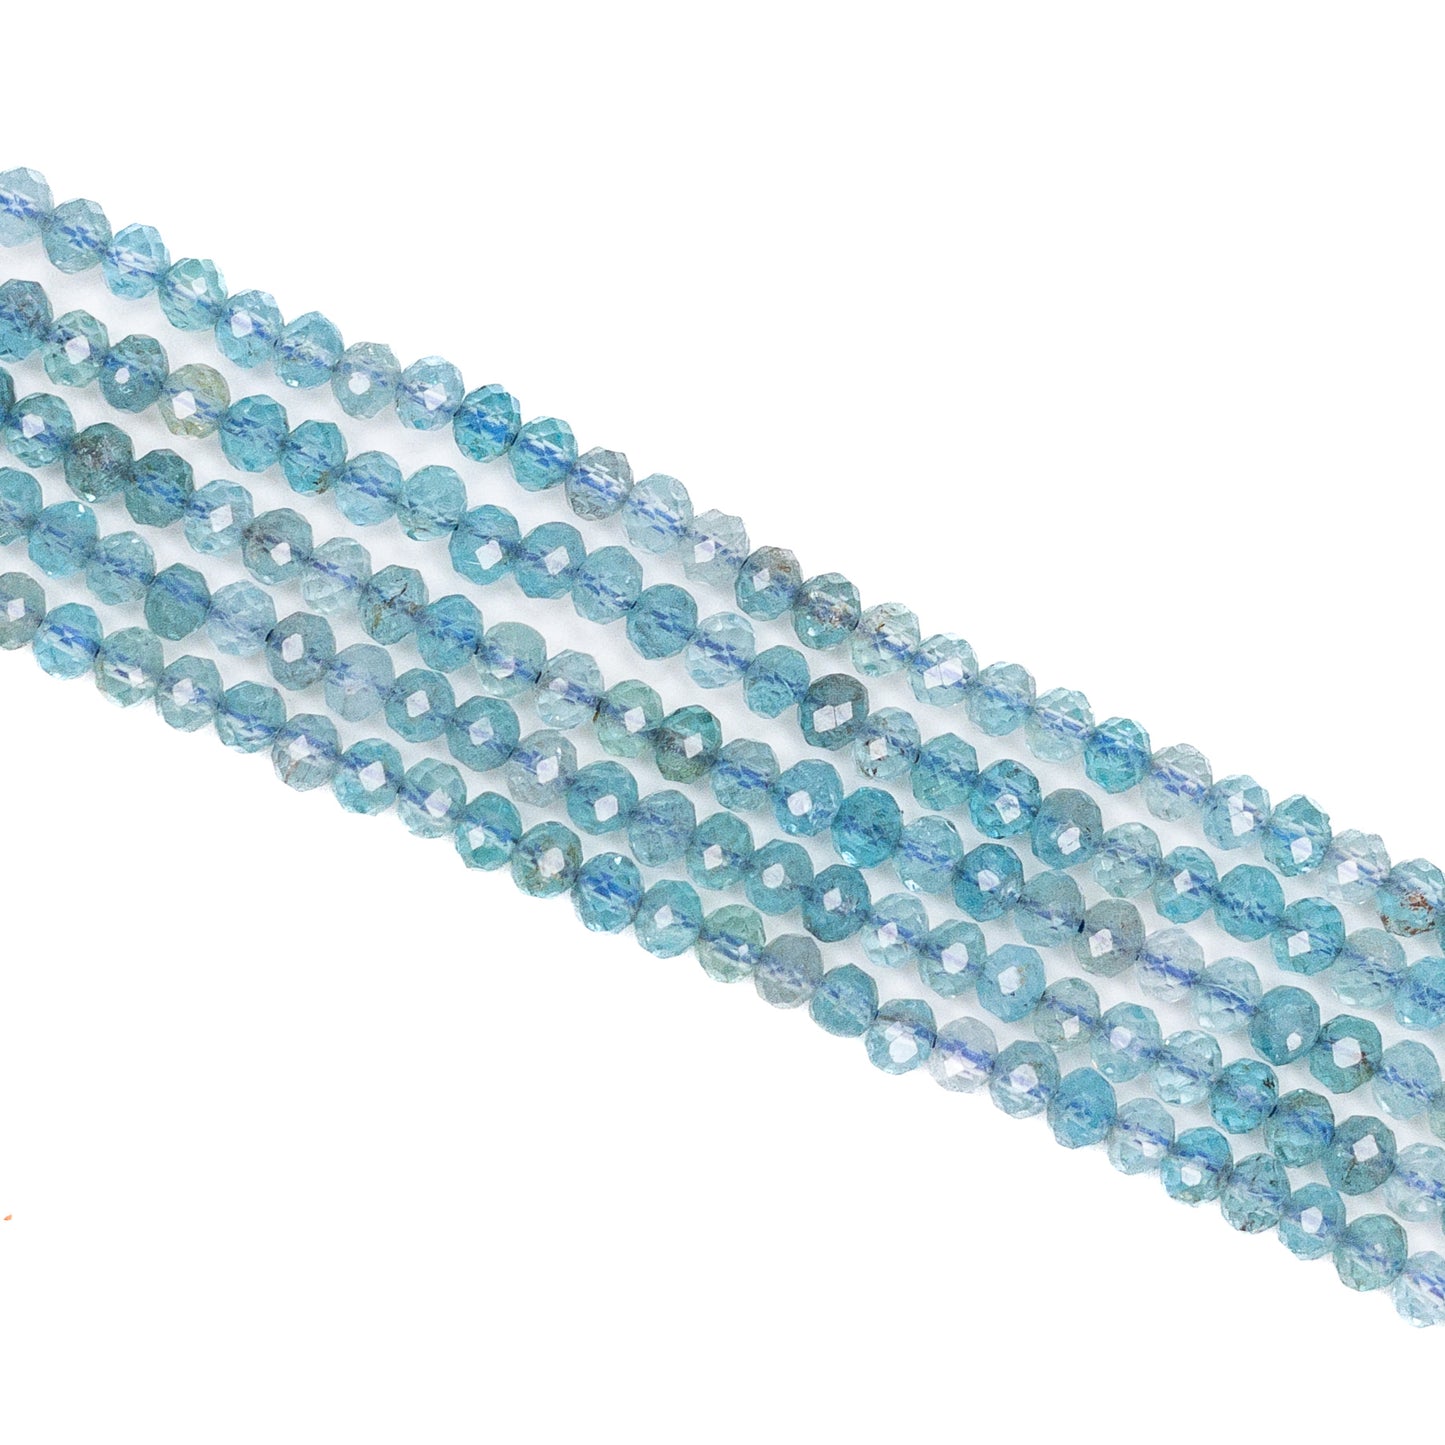 Apatite 4x3mm Faceted Rondelle Bead - 7.5" Strand